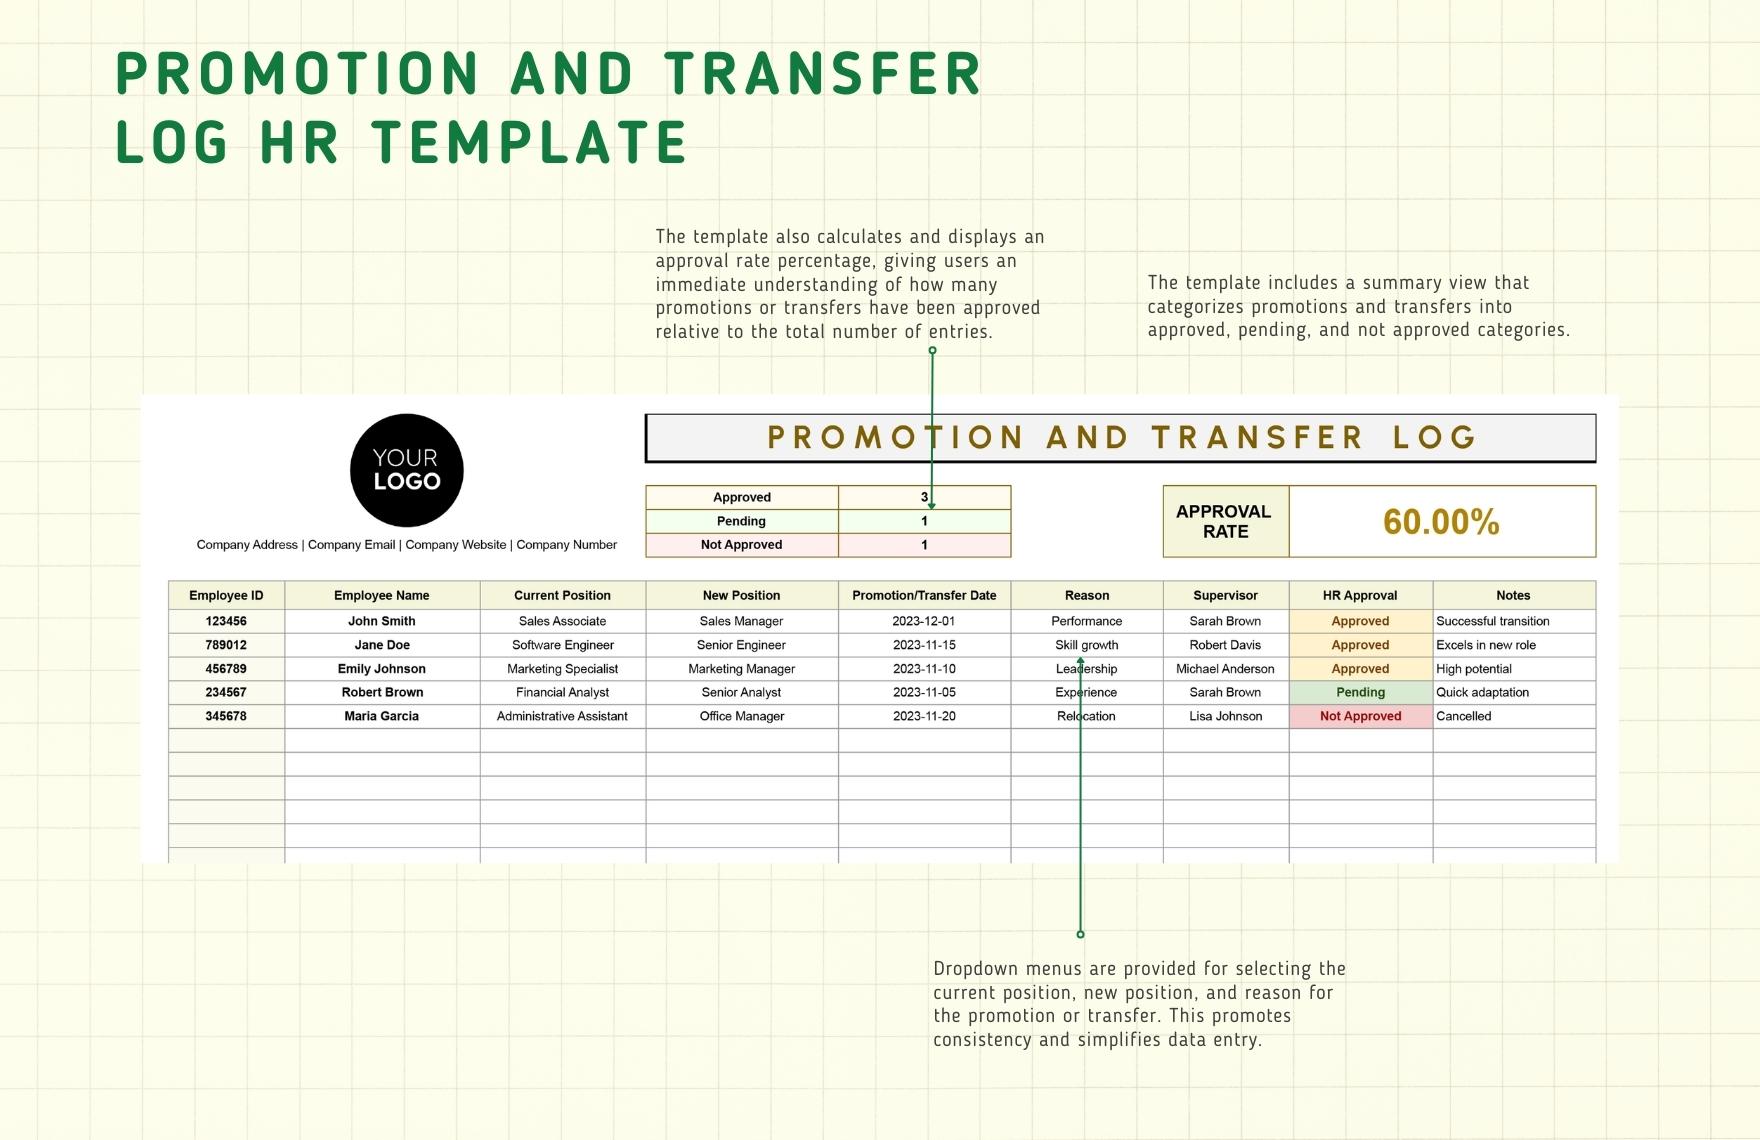 Promotion and Transfer Log HR Template